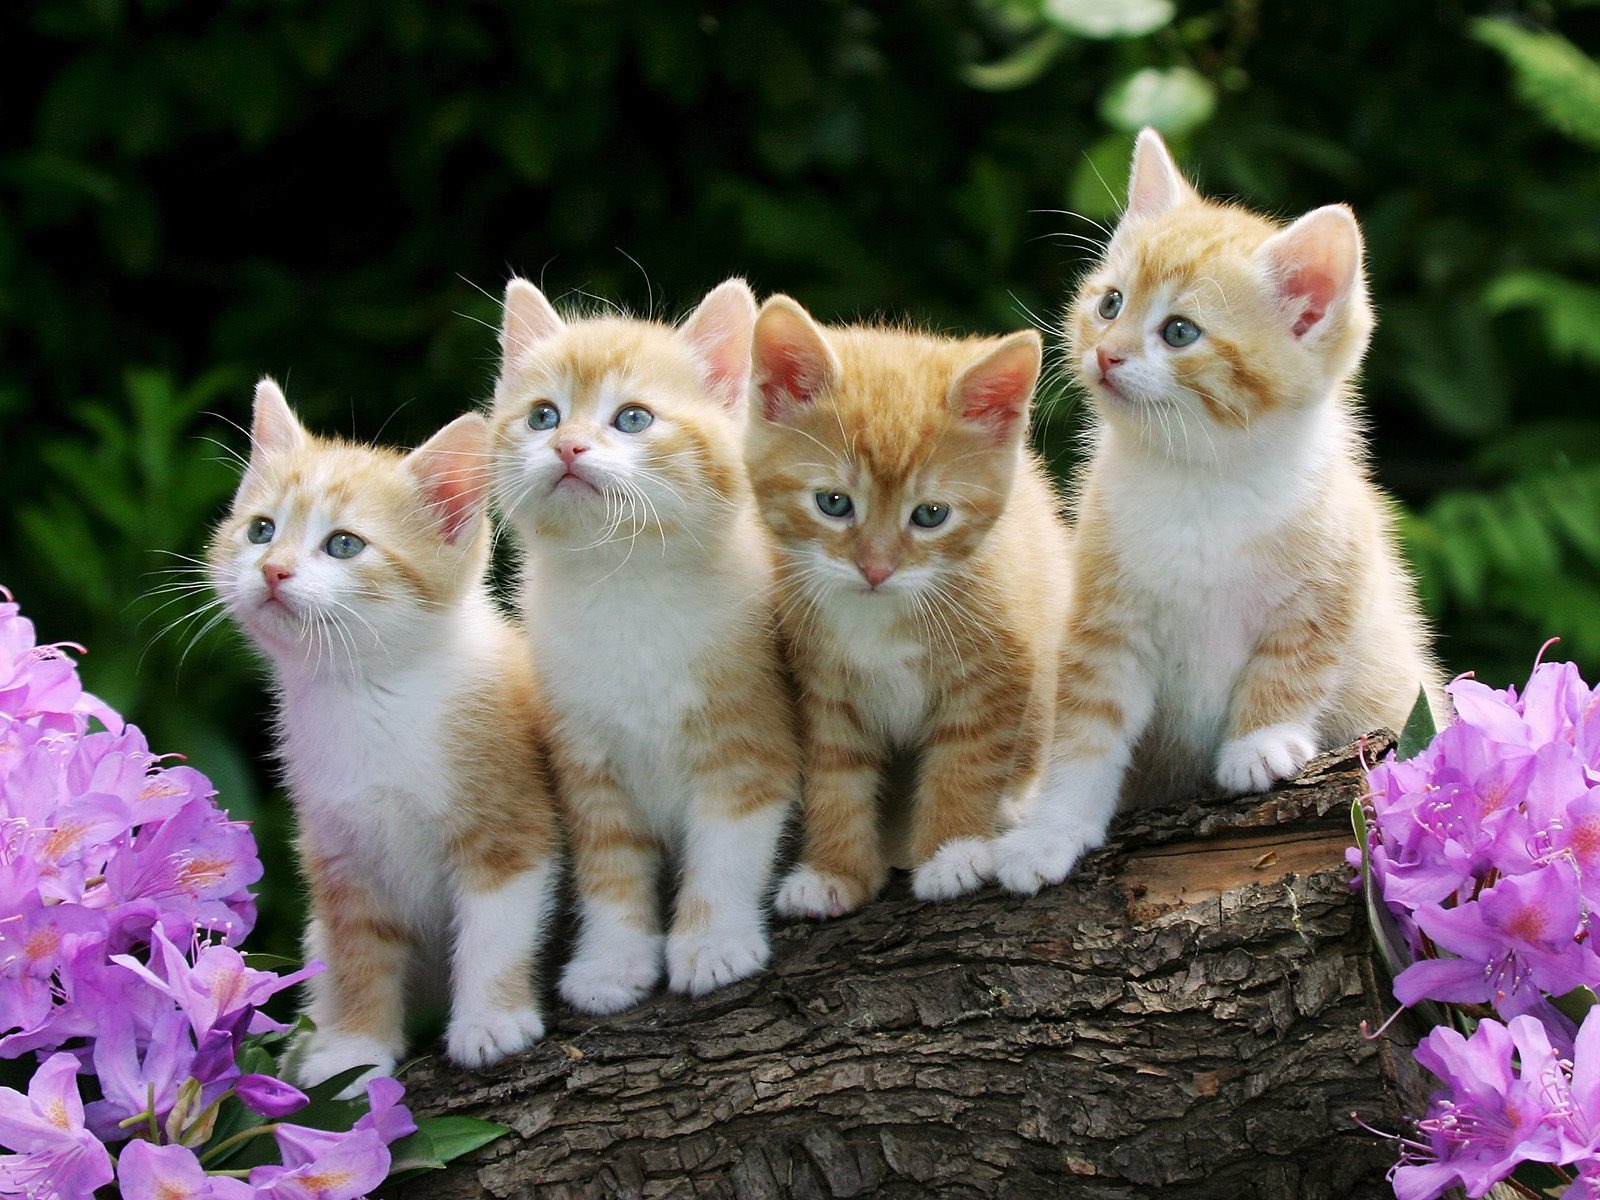 Cute kitty Wallpaper Cats Animals Wallpapers in jpg format for